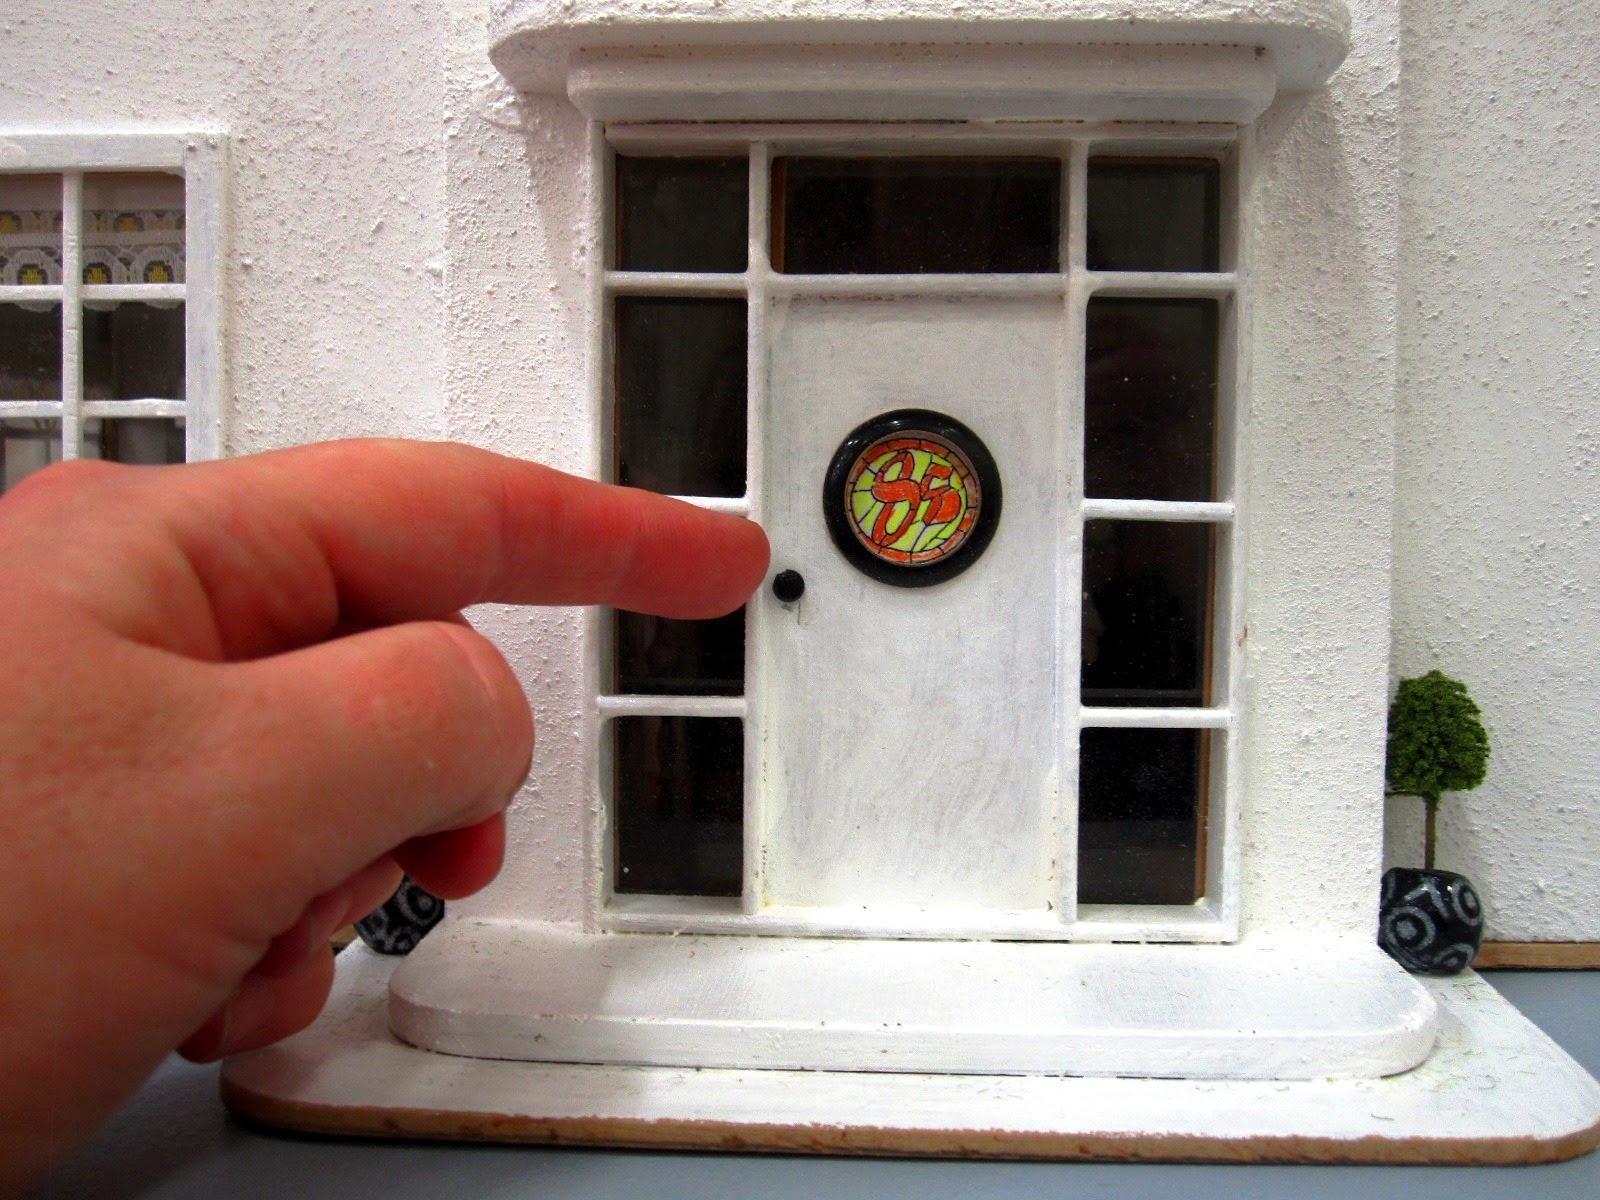 Close-up view of the front door or an Art Deco moderne-style dolls house by Anne Reid, with hand to show the scale of the house (1/24th)